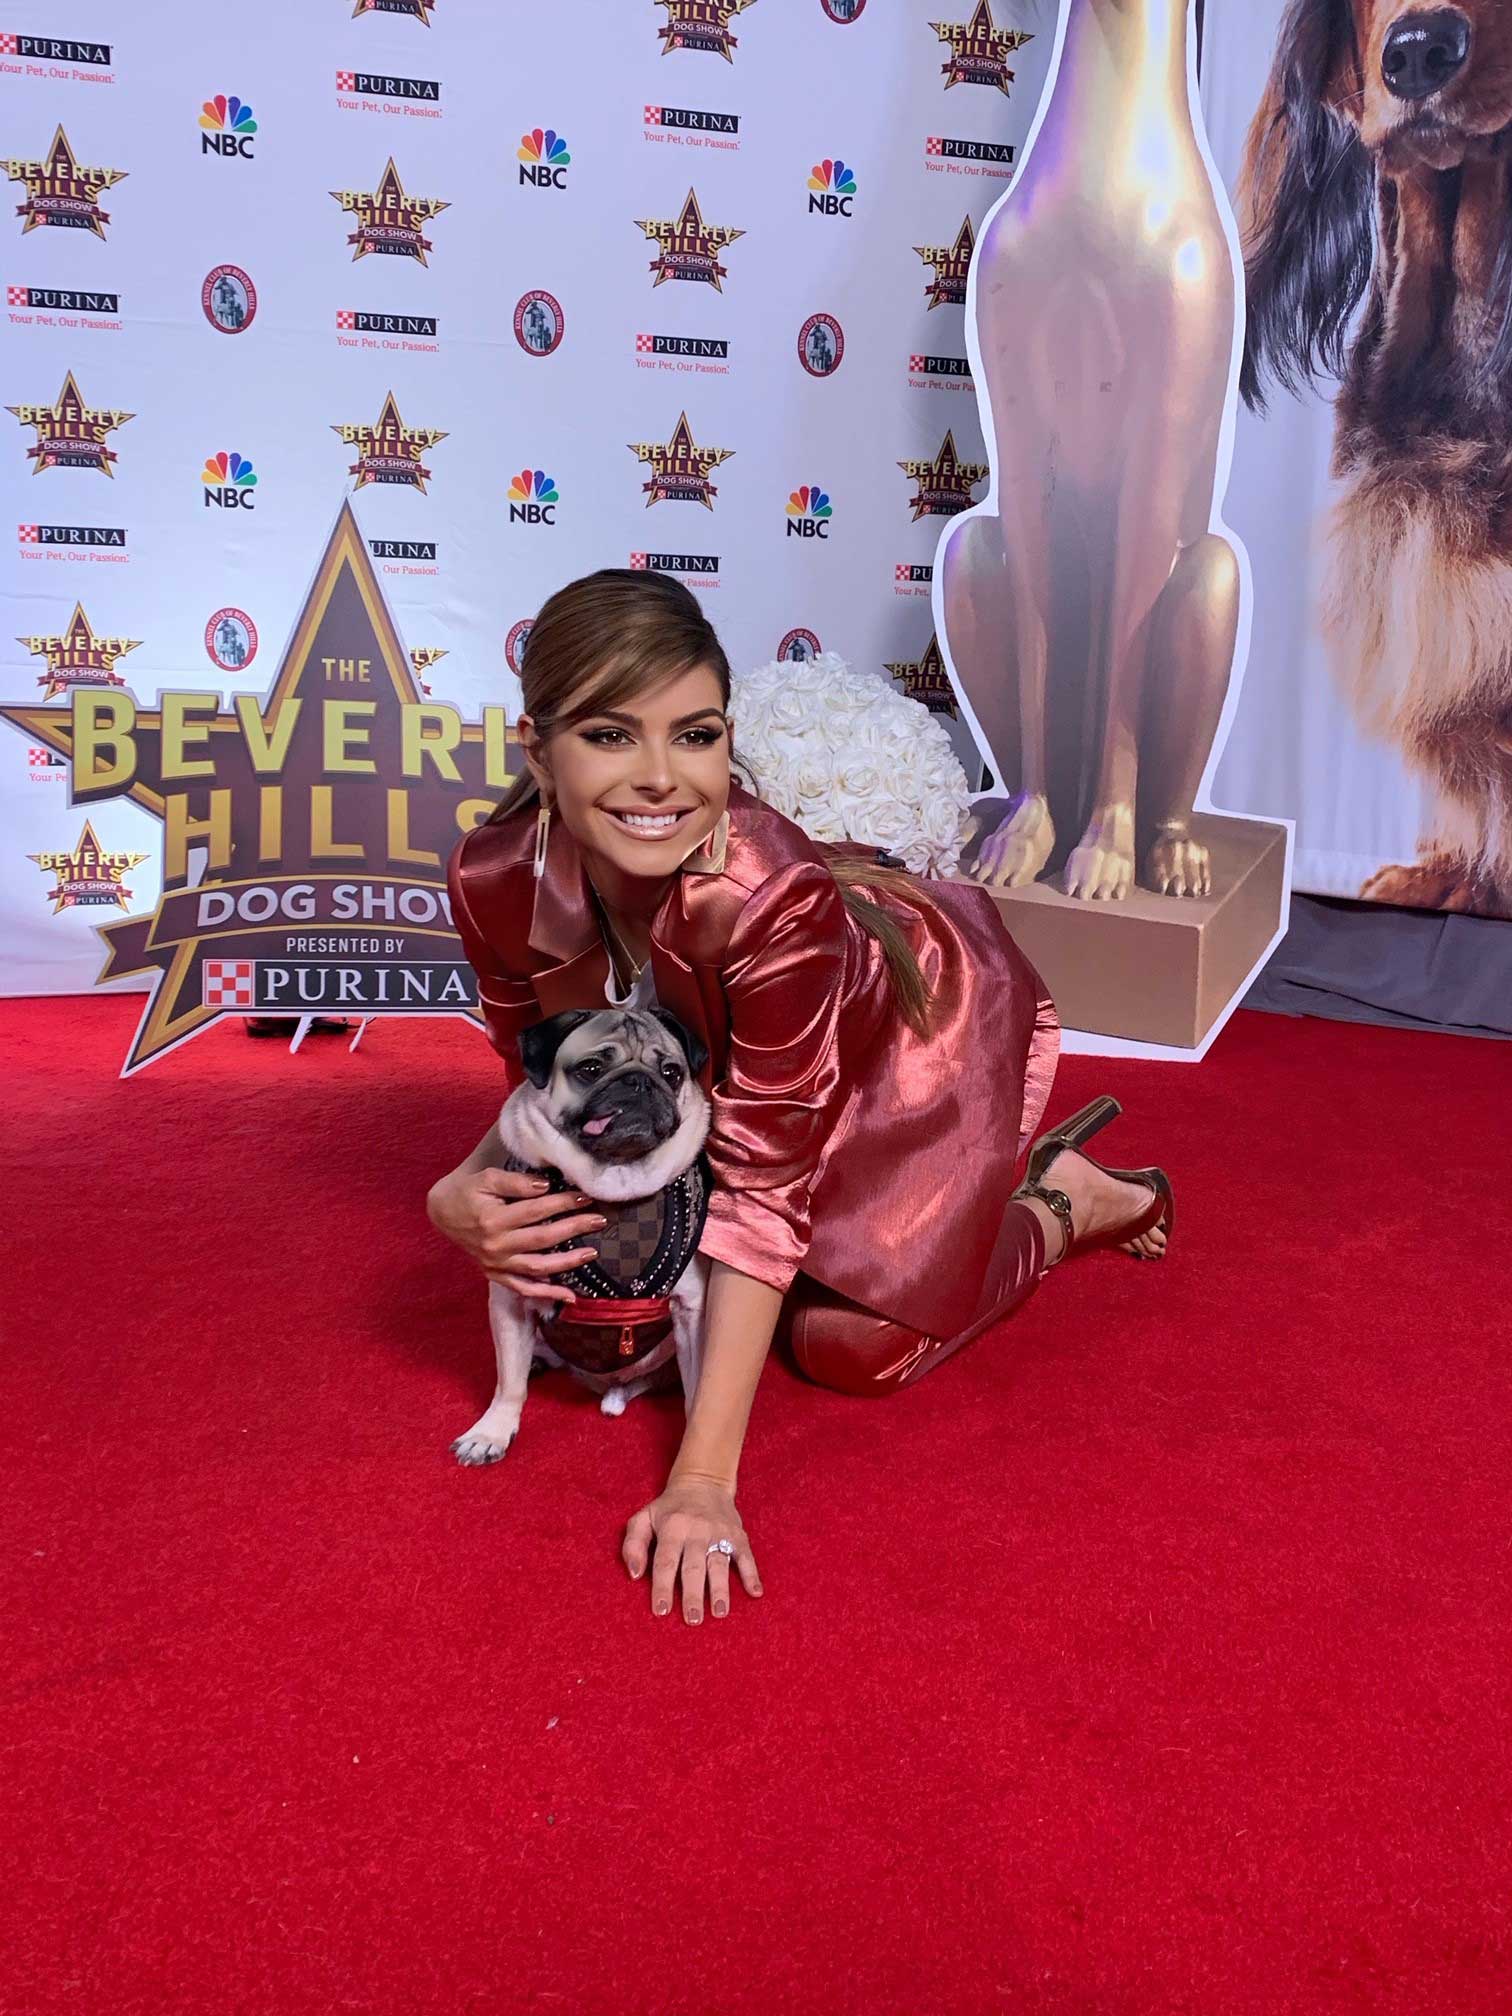 "I love working with Purina to showcase how we are better together with our pets in both good times and challenging times. My three dogs and family can't wait to tune in to this year's show!" said award-winning journalist, Maria Menounos.